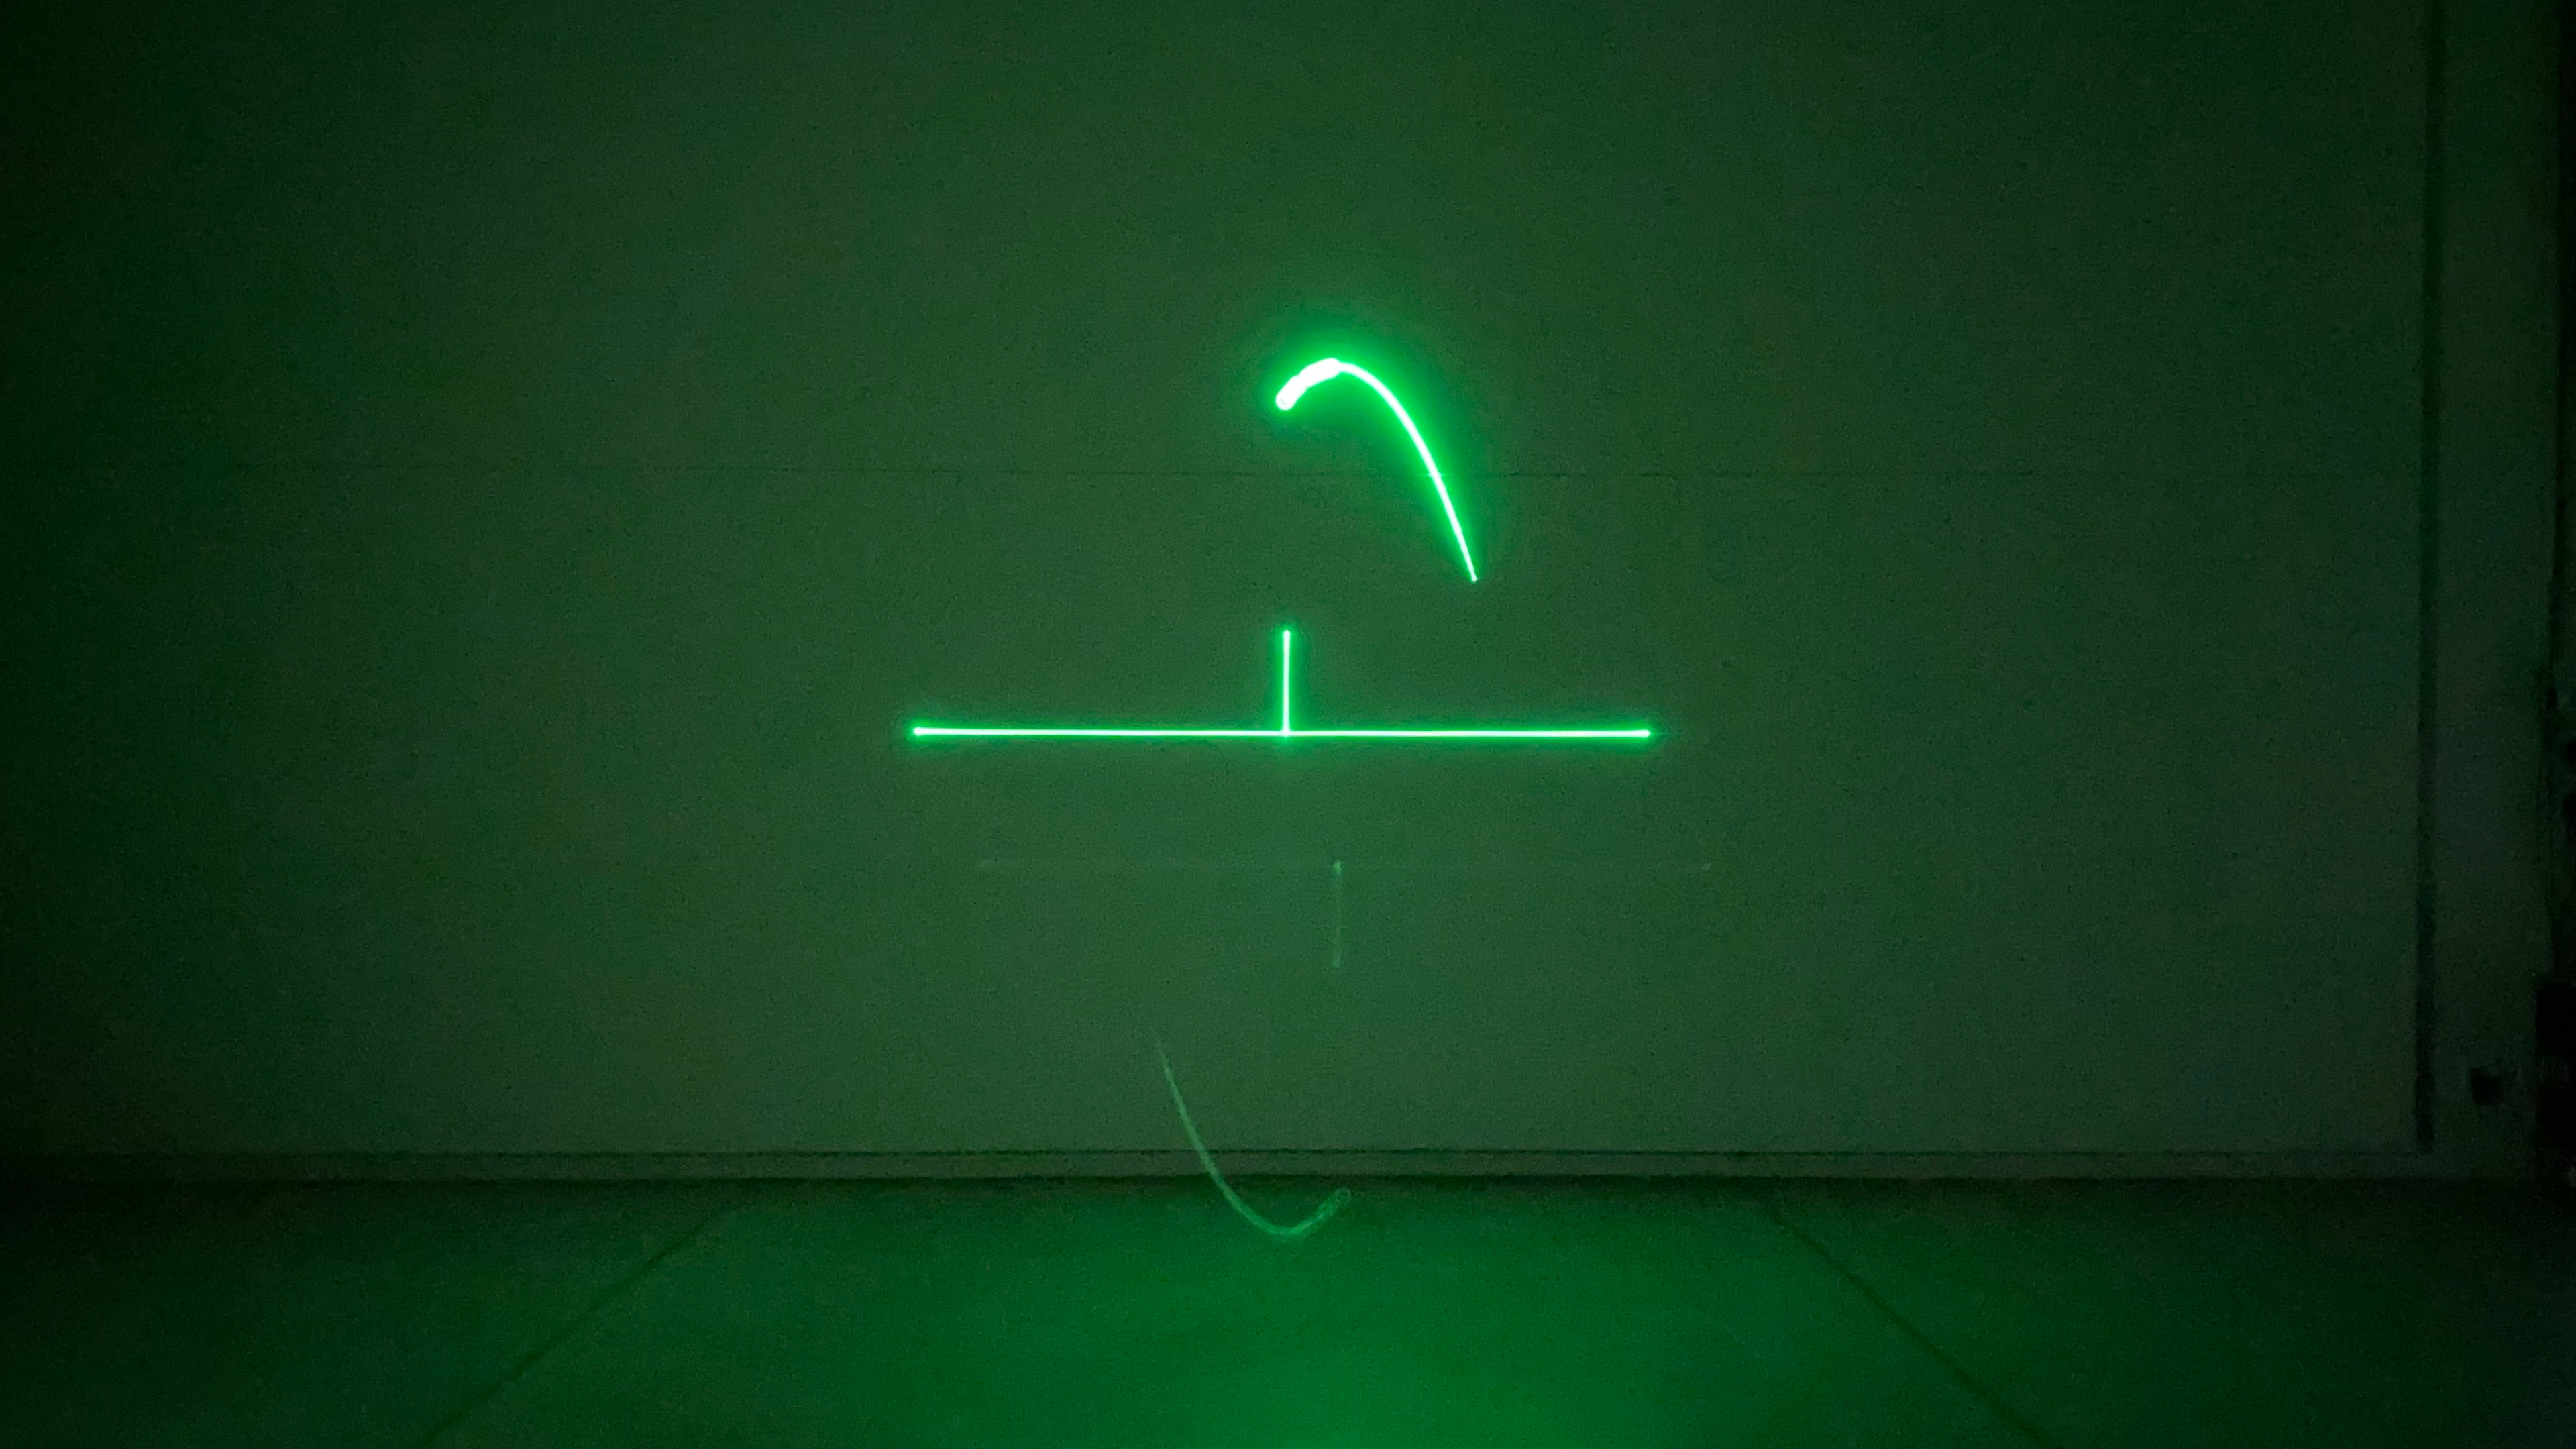 A laser projection onto a wall in a dark room. In green, tennis for two.